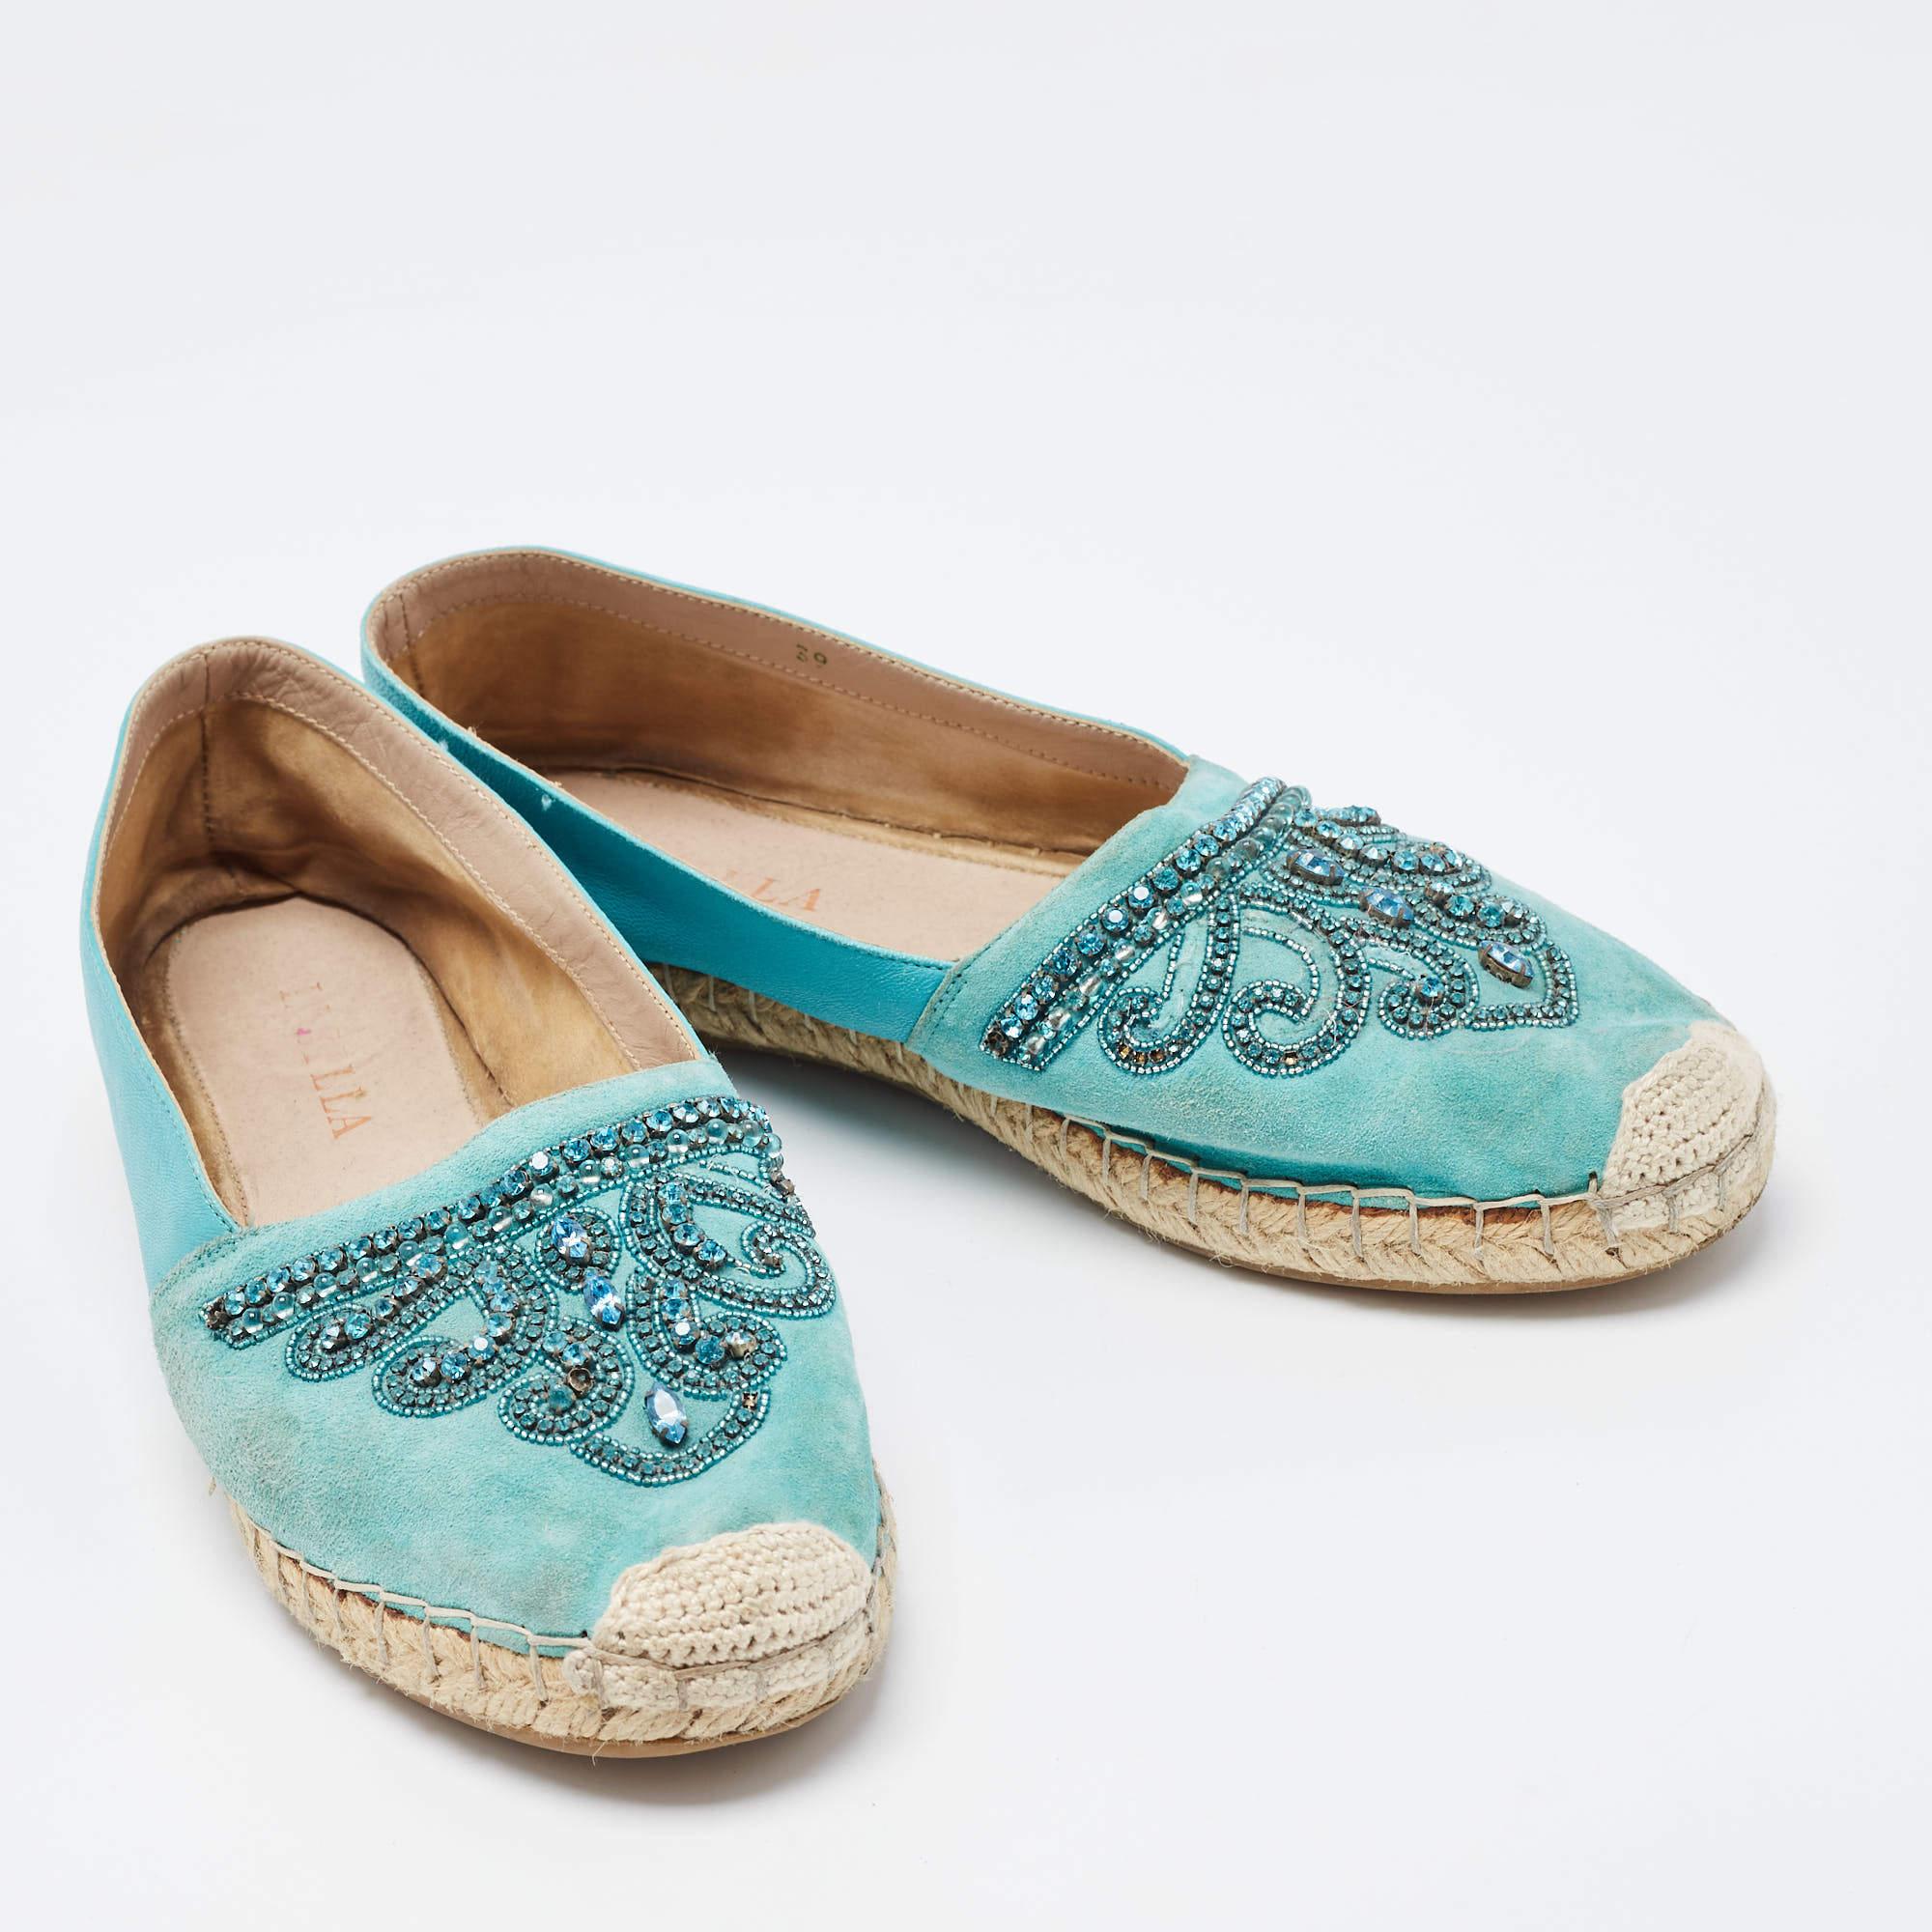 Le Silla Turquoise Suede and Leather Crystal Embellished Espadrille Size 39 In Good Condition For Sale In Dubai, Al Qouz 2